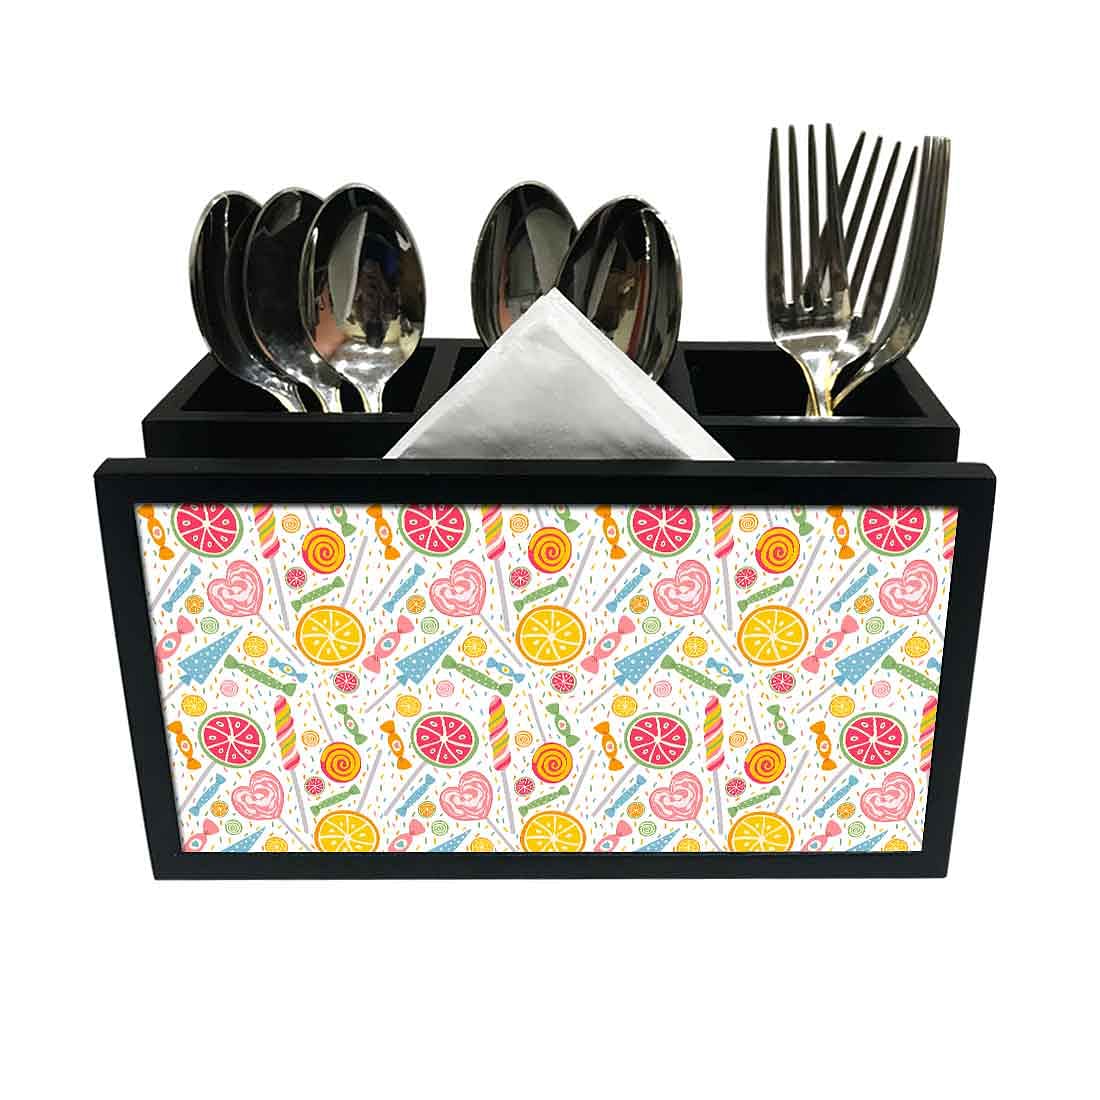 Cutlery Tissue Holder Napkin Stand -  Colorful Candy Nutcase